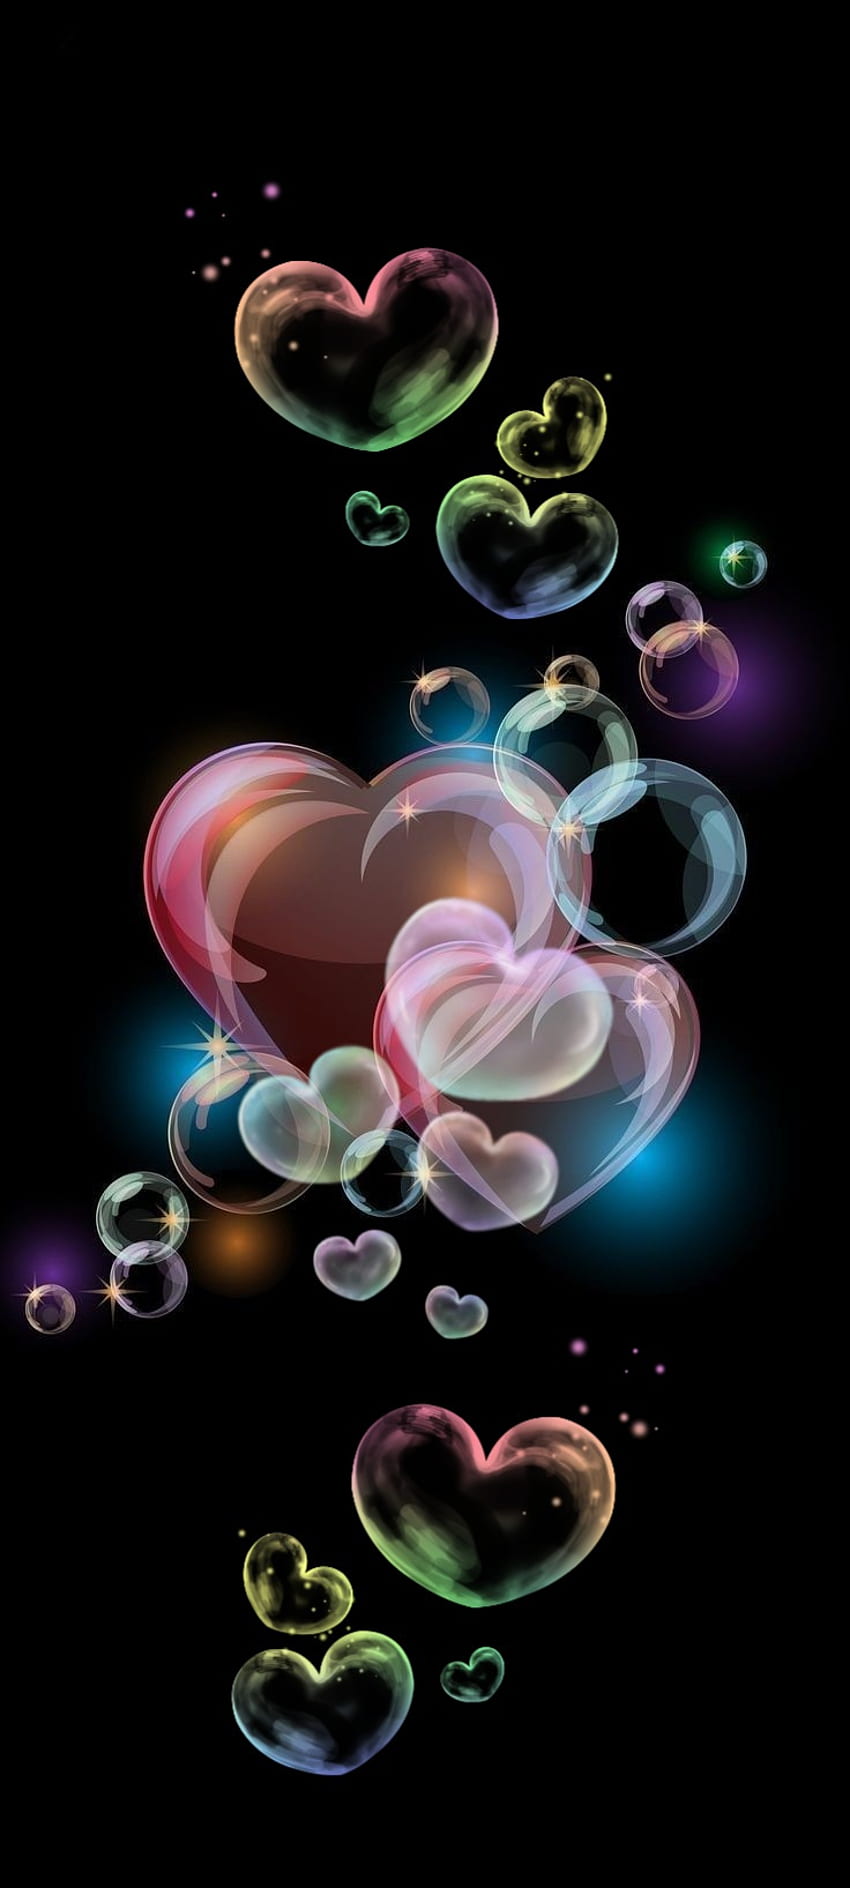 HD wallpaper Colorful Heart Candles bubble heart wallpaper Aero Love  Relationship  Wallpaper Flare